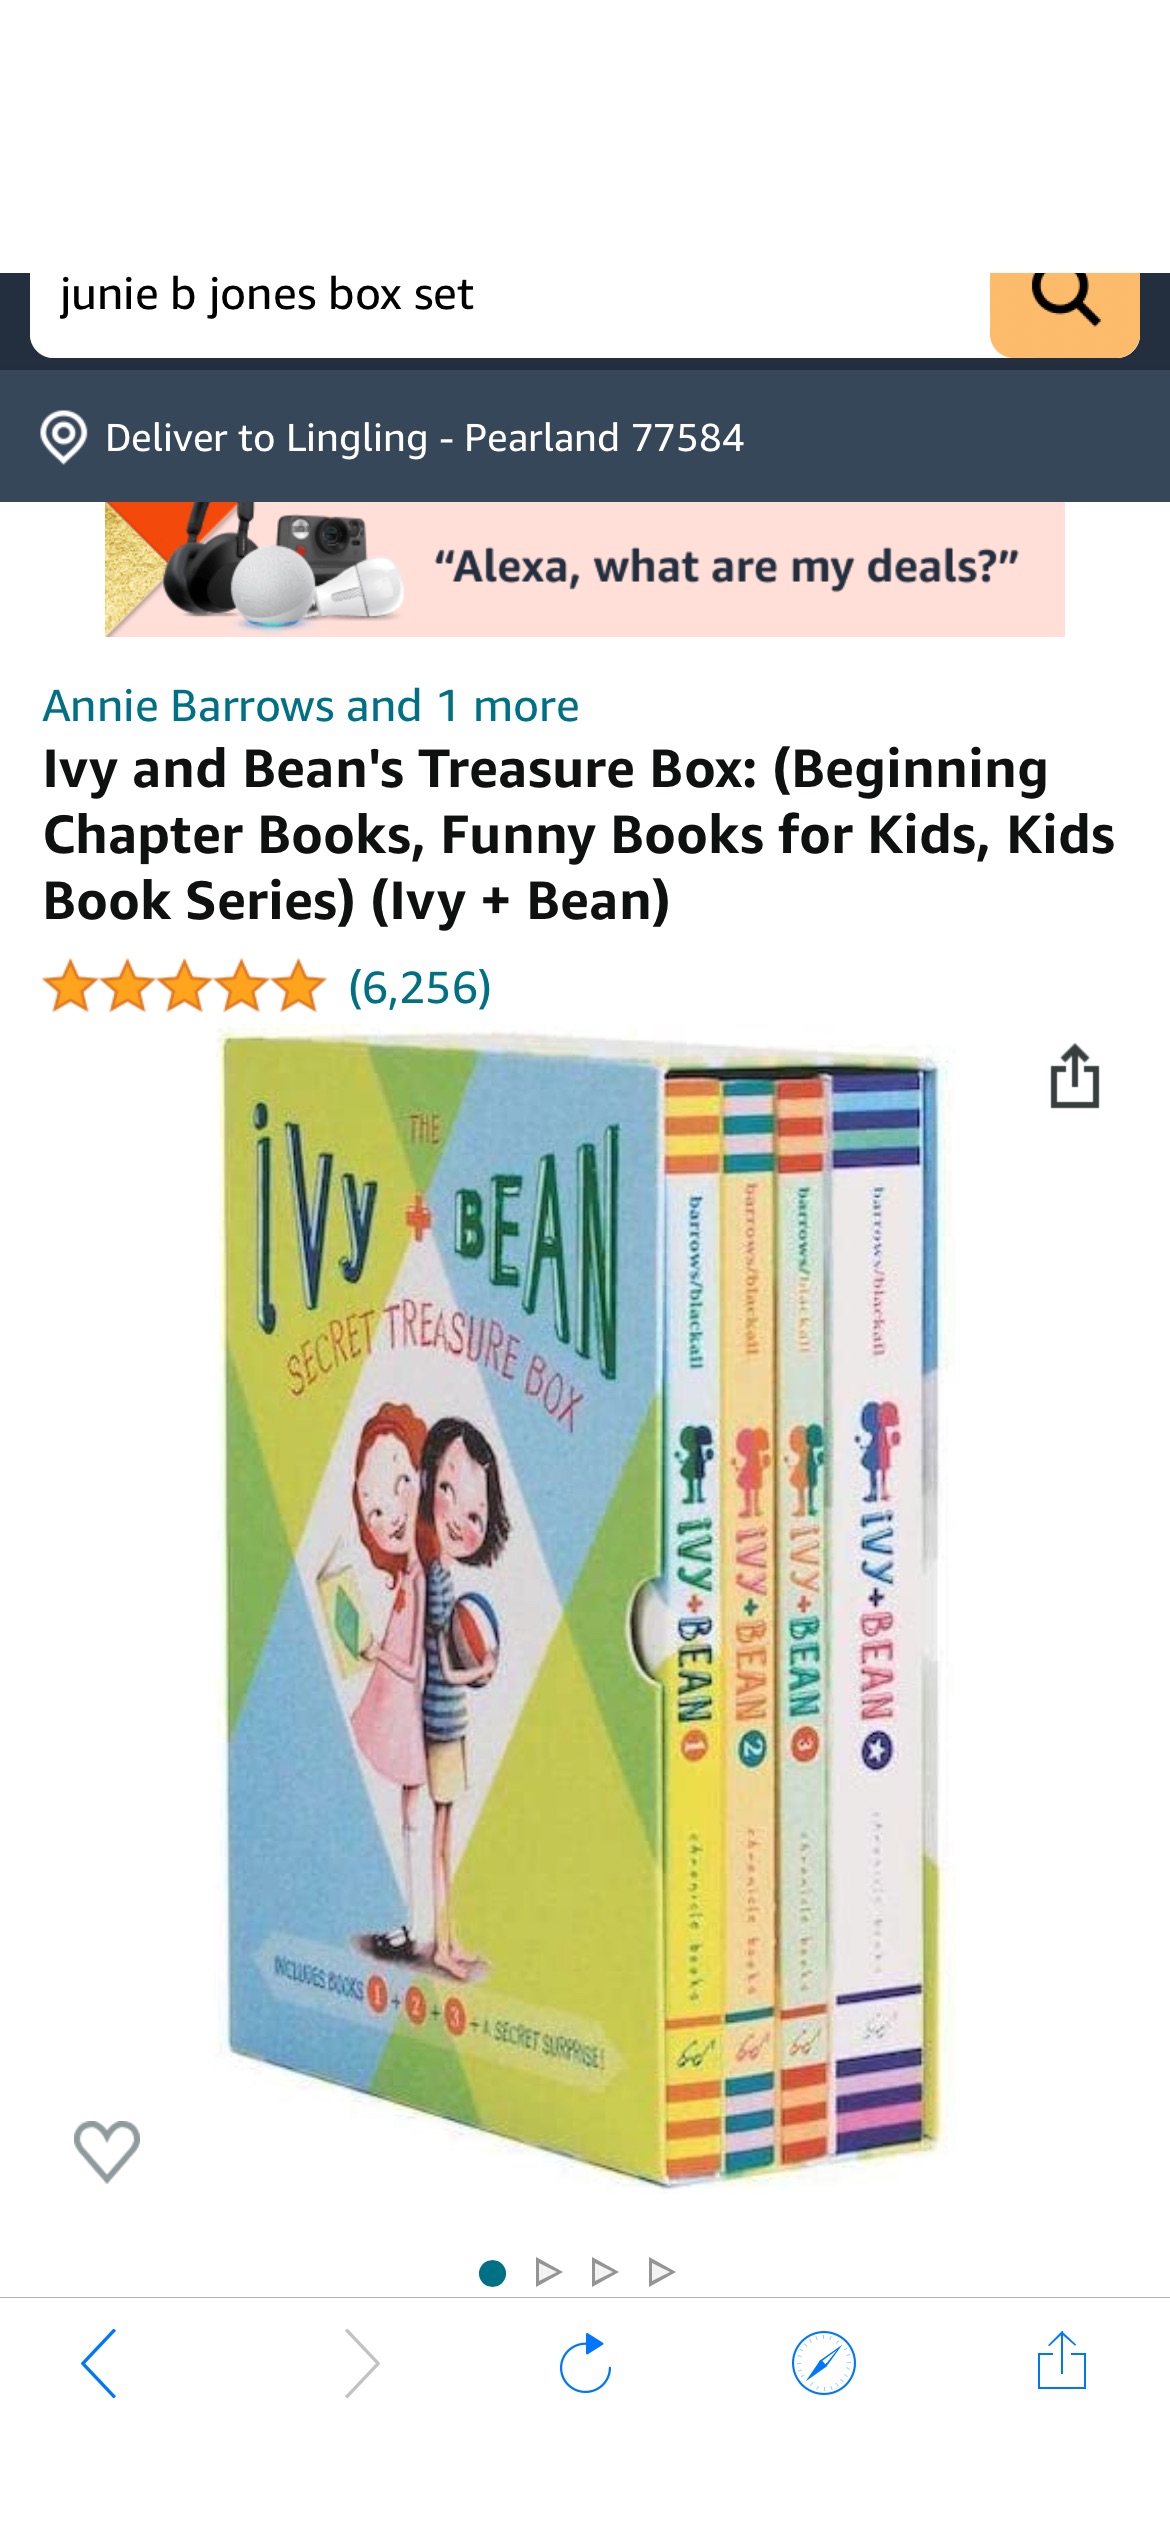 Amazon.com: Ivy and Bean's Treasure Box: (Beginning Chapter Books, Funny Books for Kids, Kids Book Series) (Ivy + Bean): 9780811864954: Annie Barrows, Sophie Blackall: Books